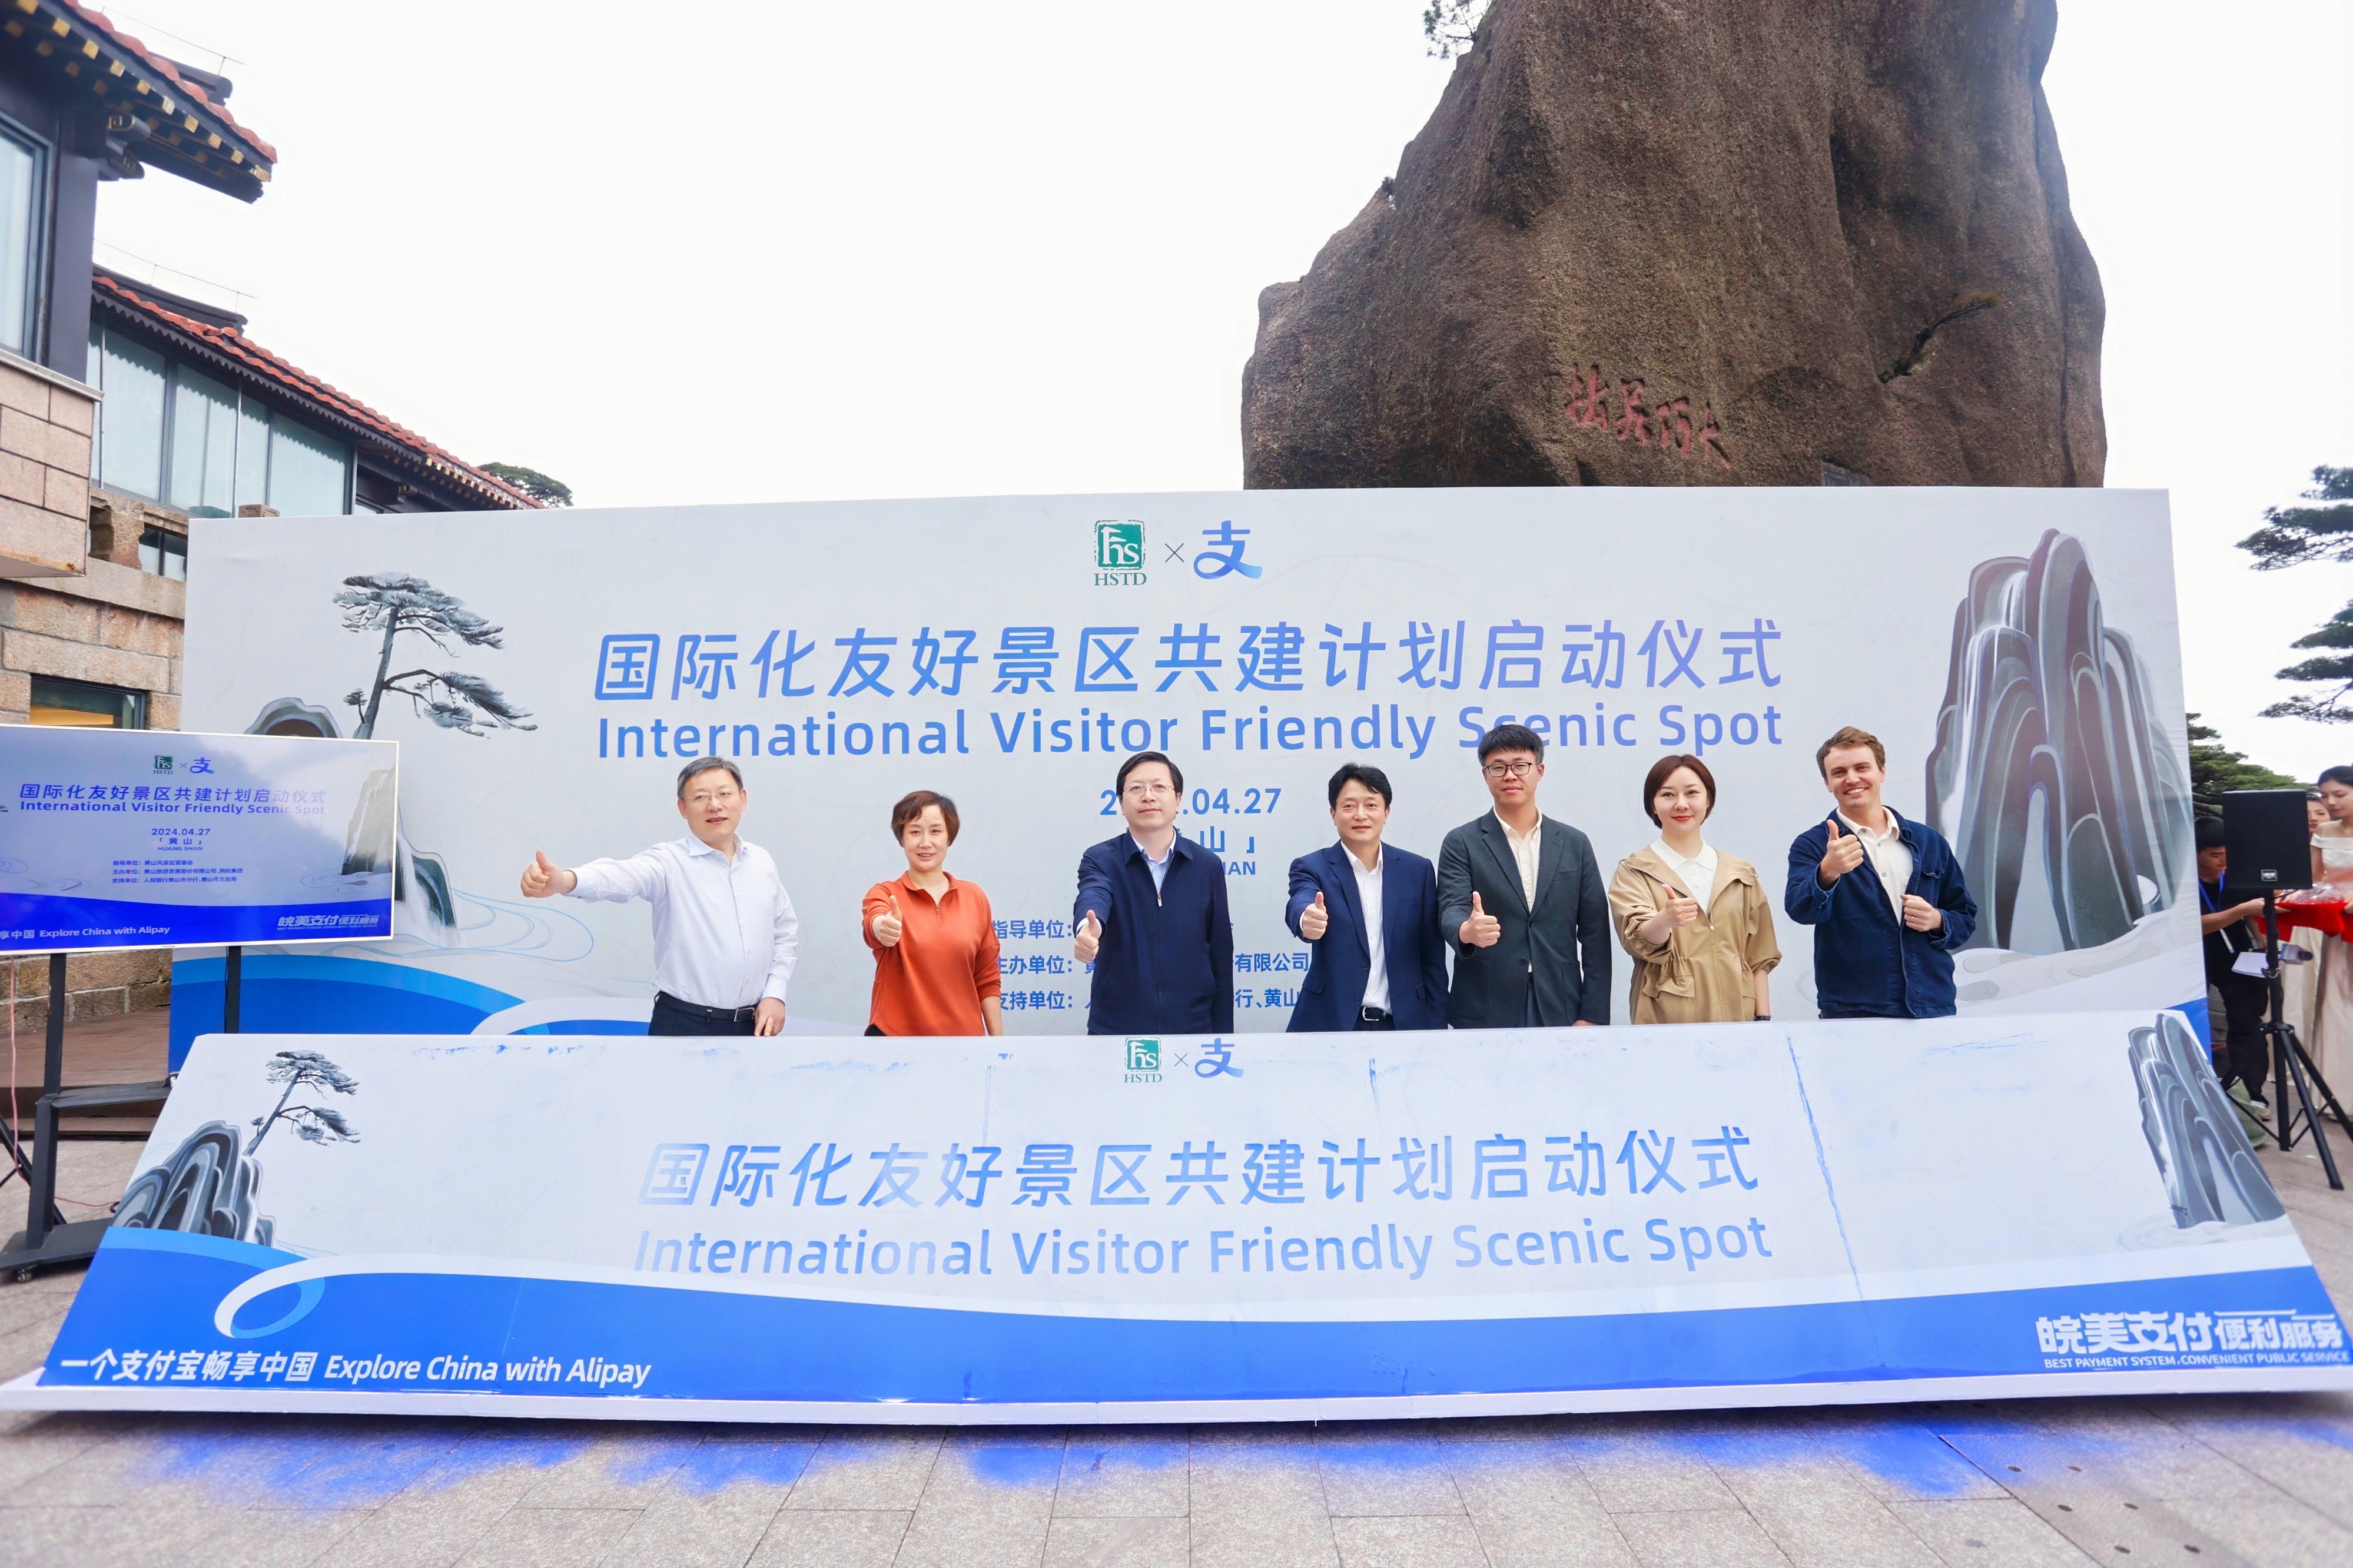 Huangshan partners with Alipay to create intl scenic area